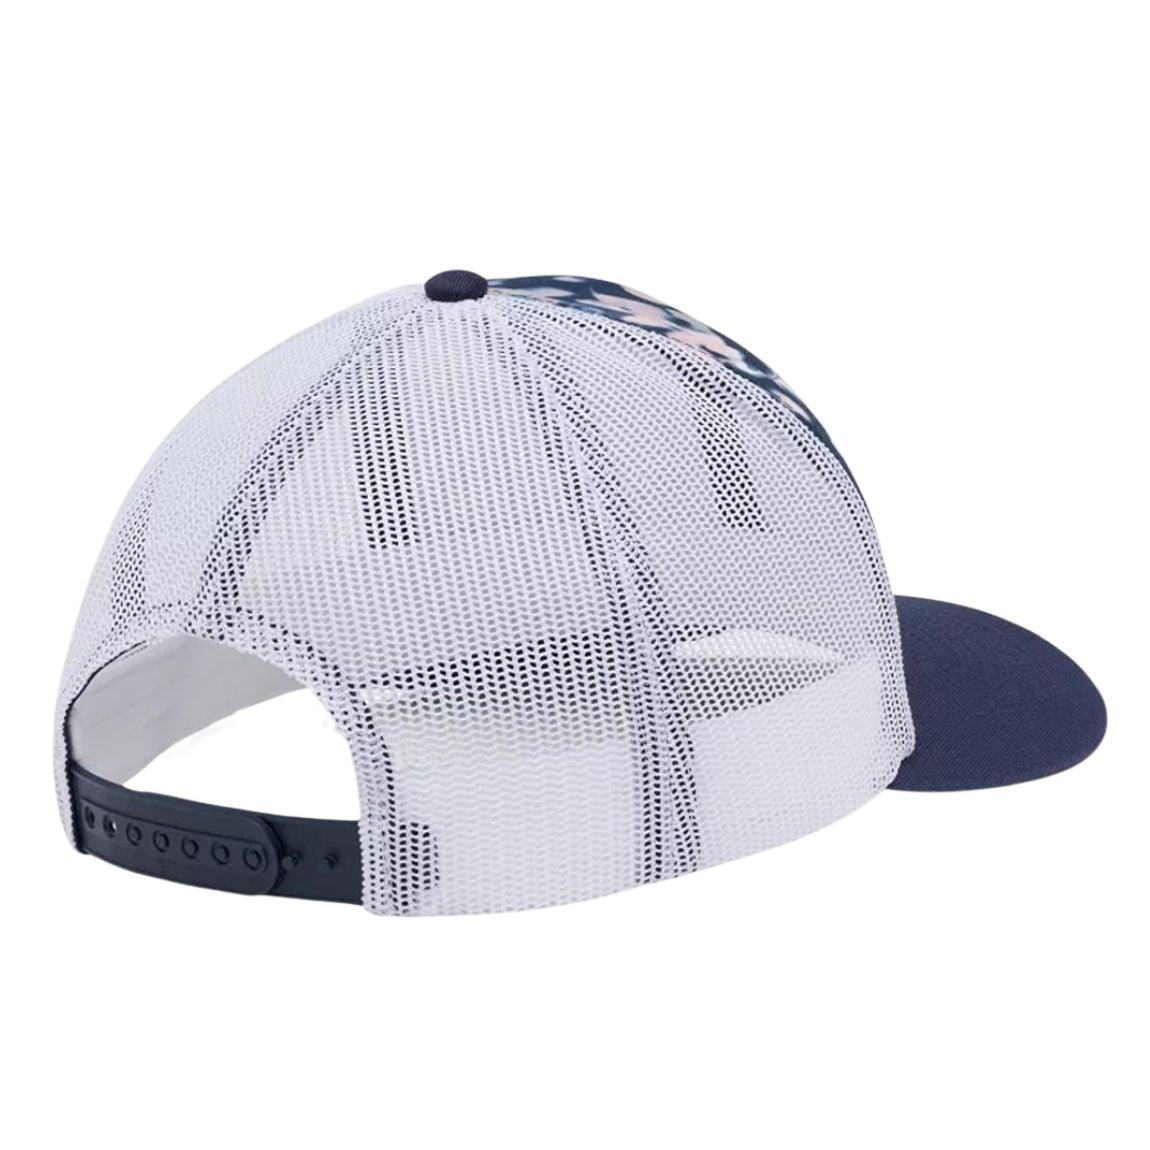 Punchbowl™ Trucker Hat - Sports Excellence